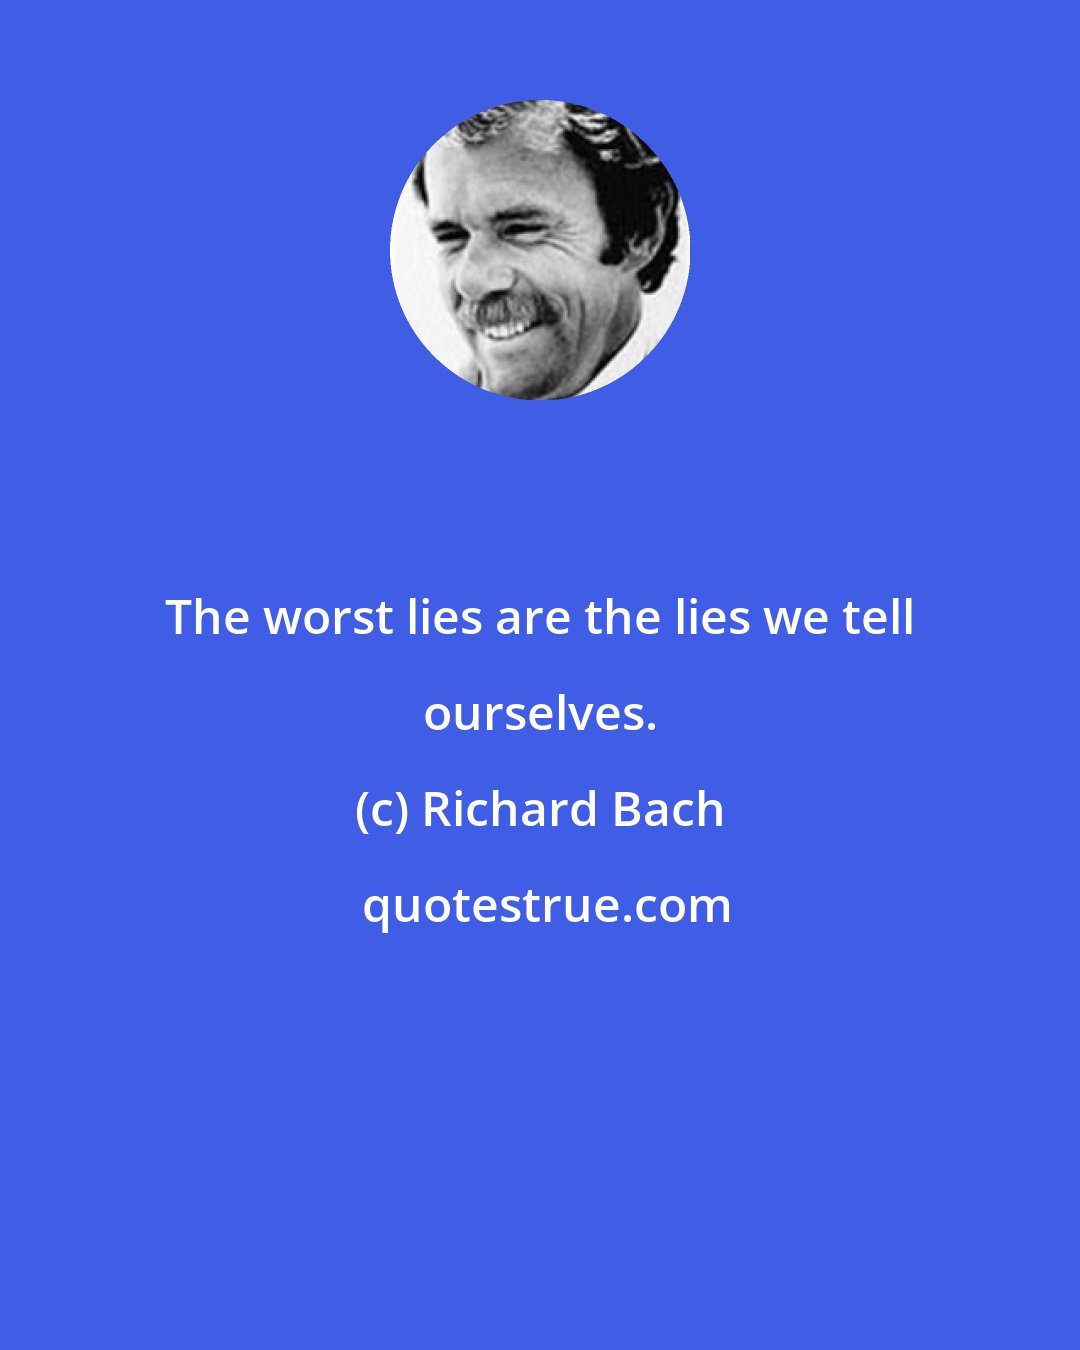 Richard Bach: The worst lies are the lies we tell ourselves.